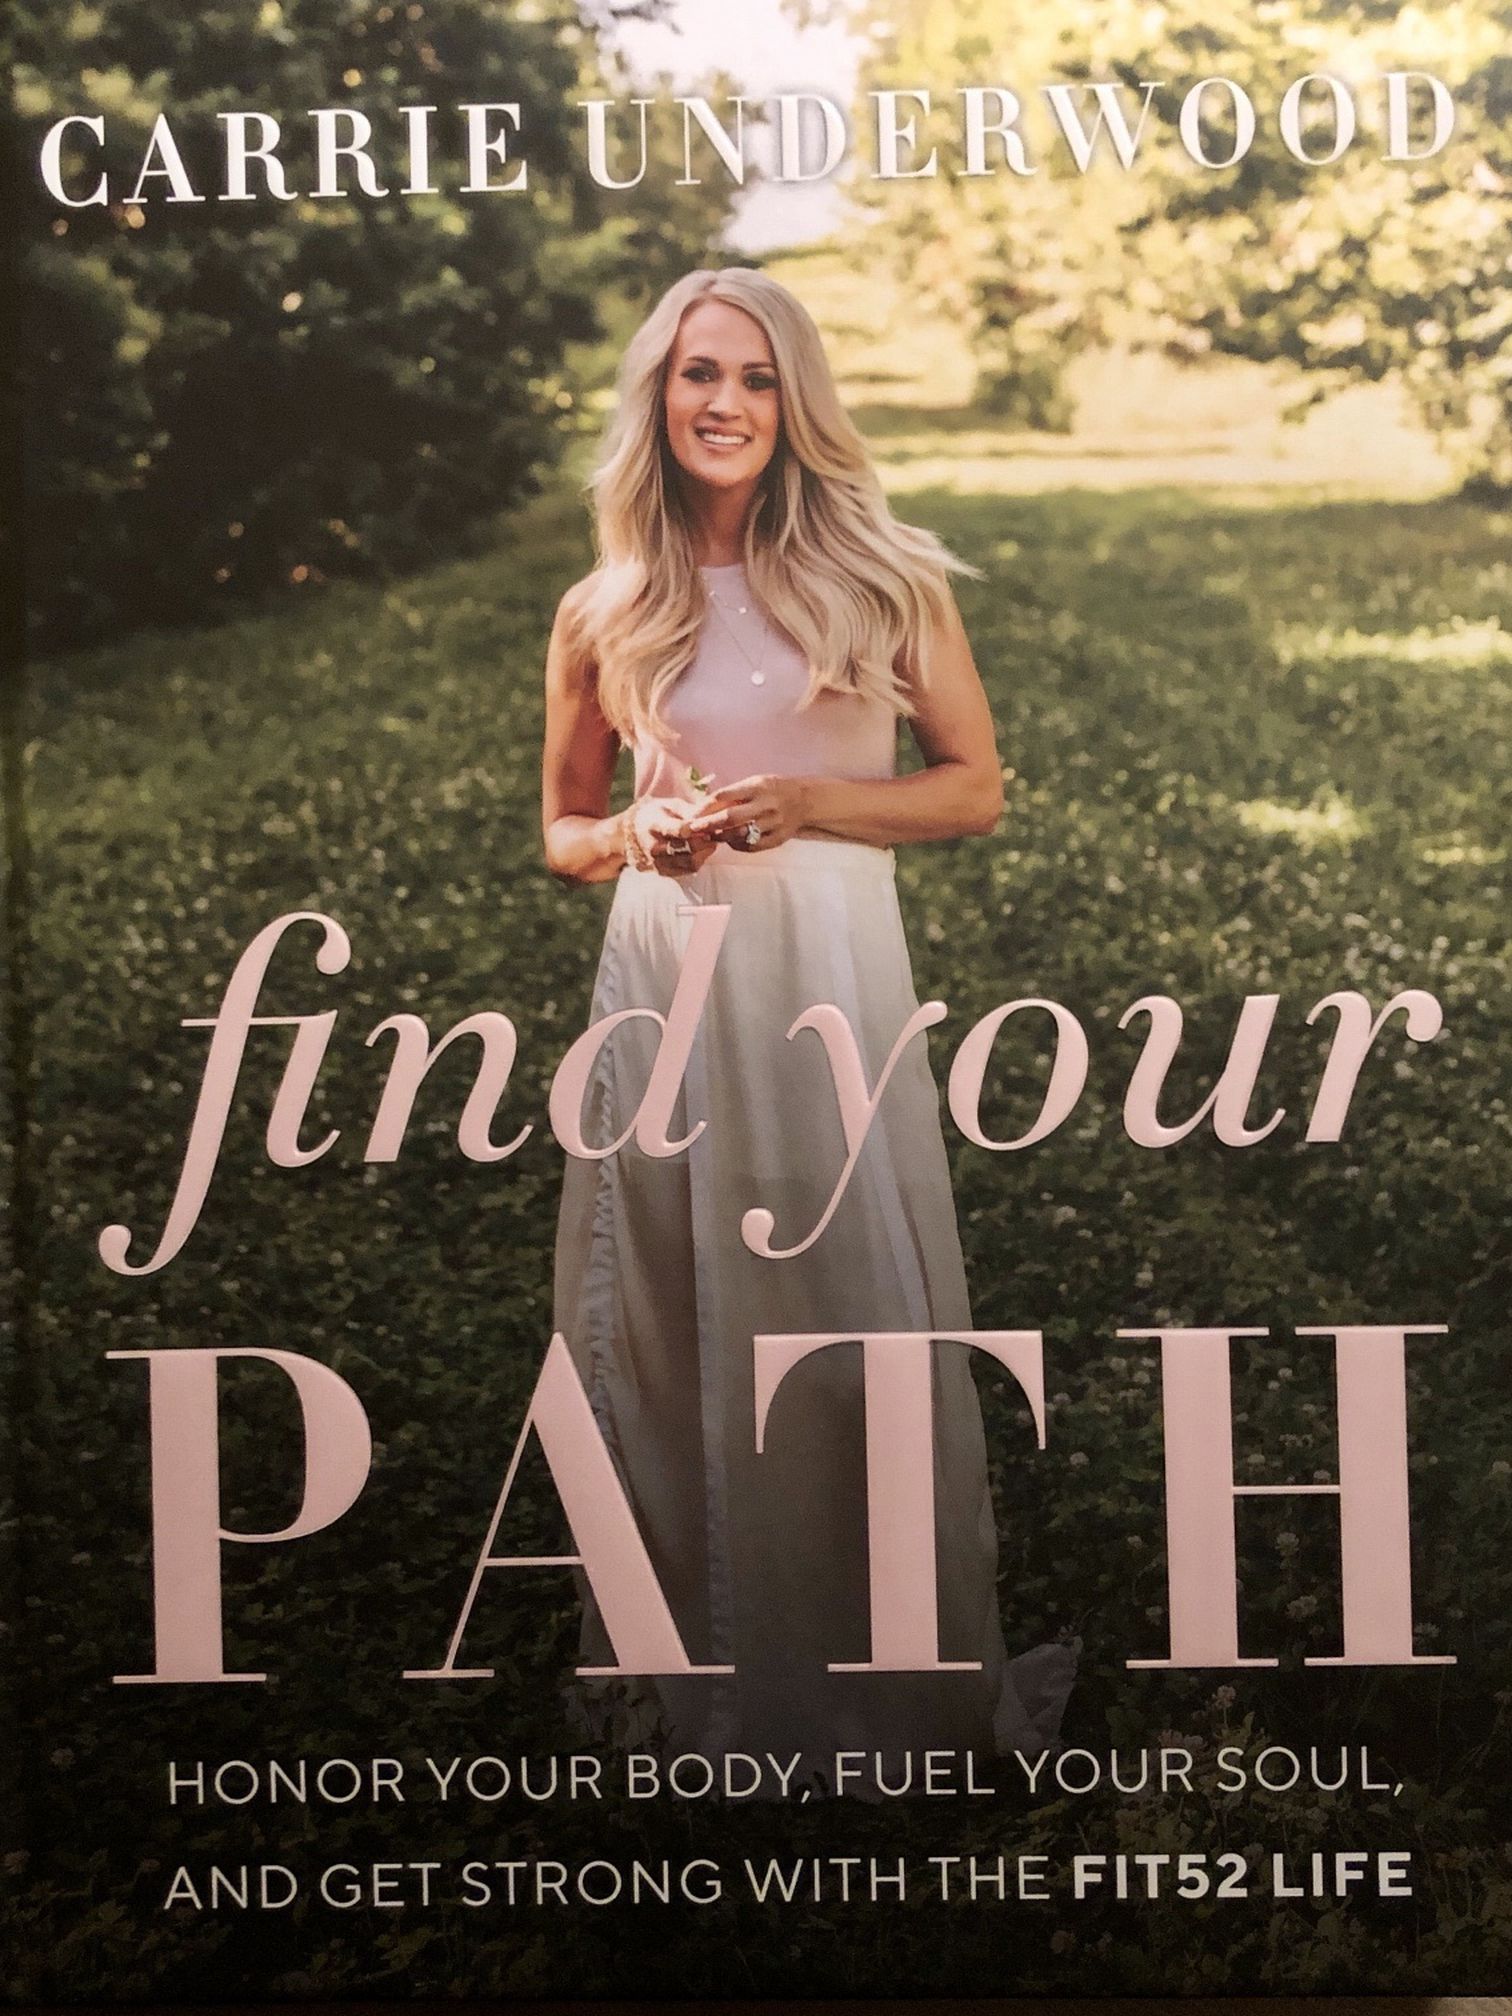 Carrie Underwood: Find Your Path (Hardcover Book)